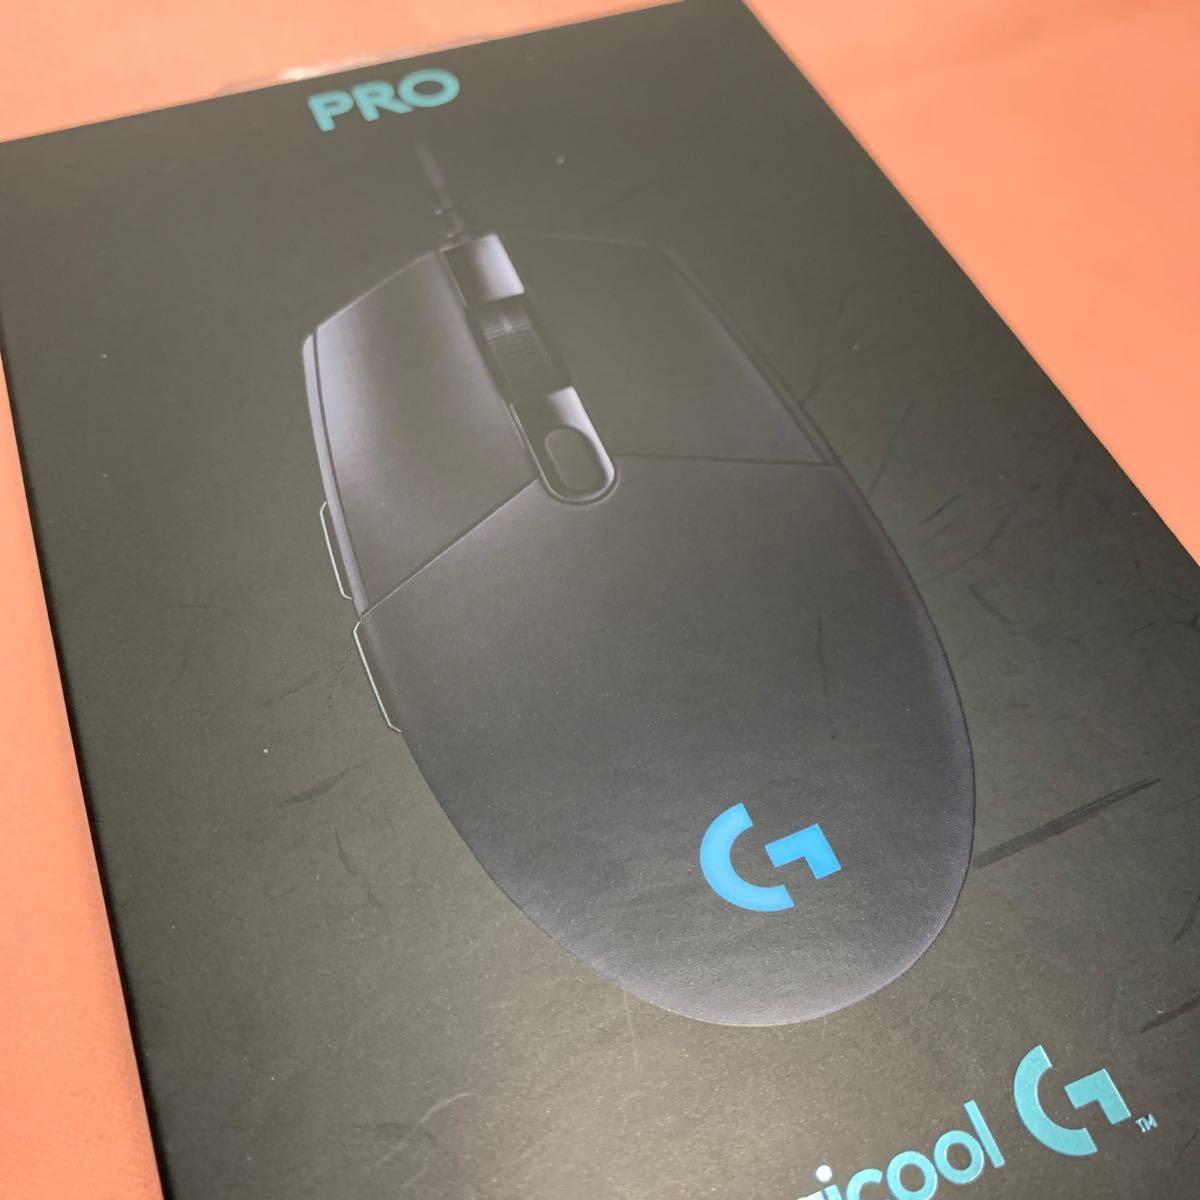 Logicoolrosi cool PRO HEROge-ming mouse G-PPD-001t ( black ) new goods unopened unused goods 